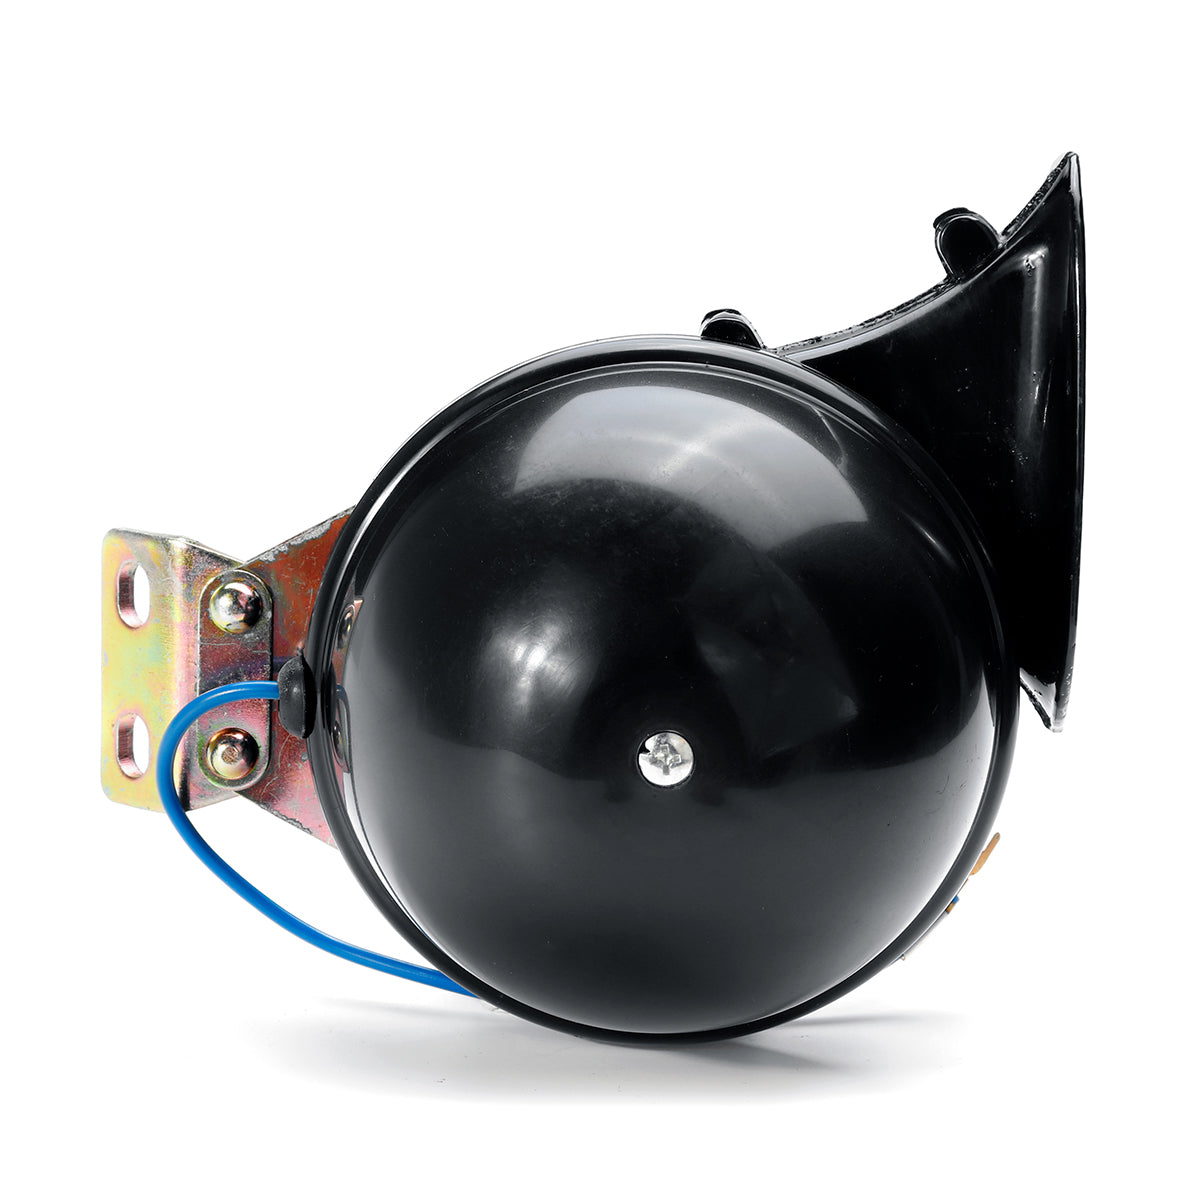 12V 250dB Electric Bull Horn Waterproof Super Loud Raging Sound Universal For Car Motorcycle 